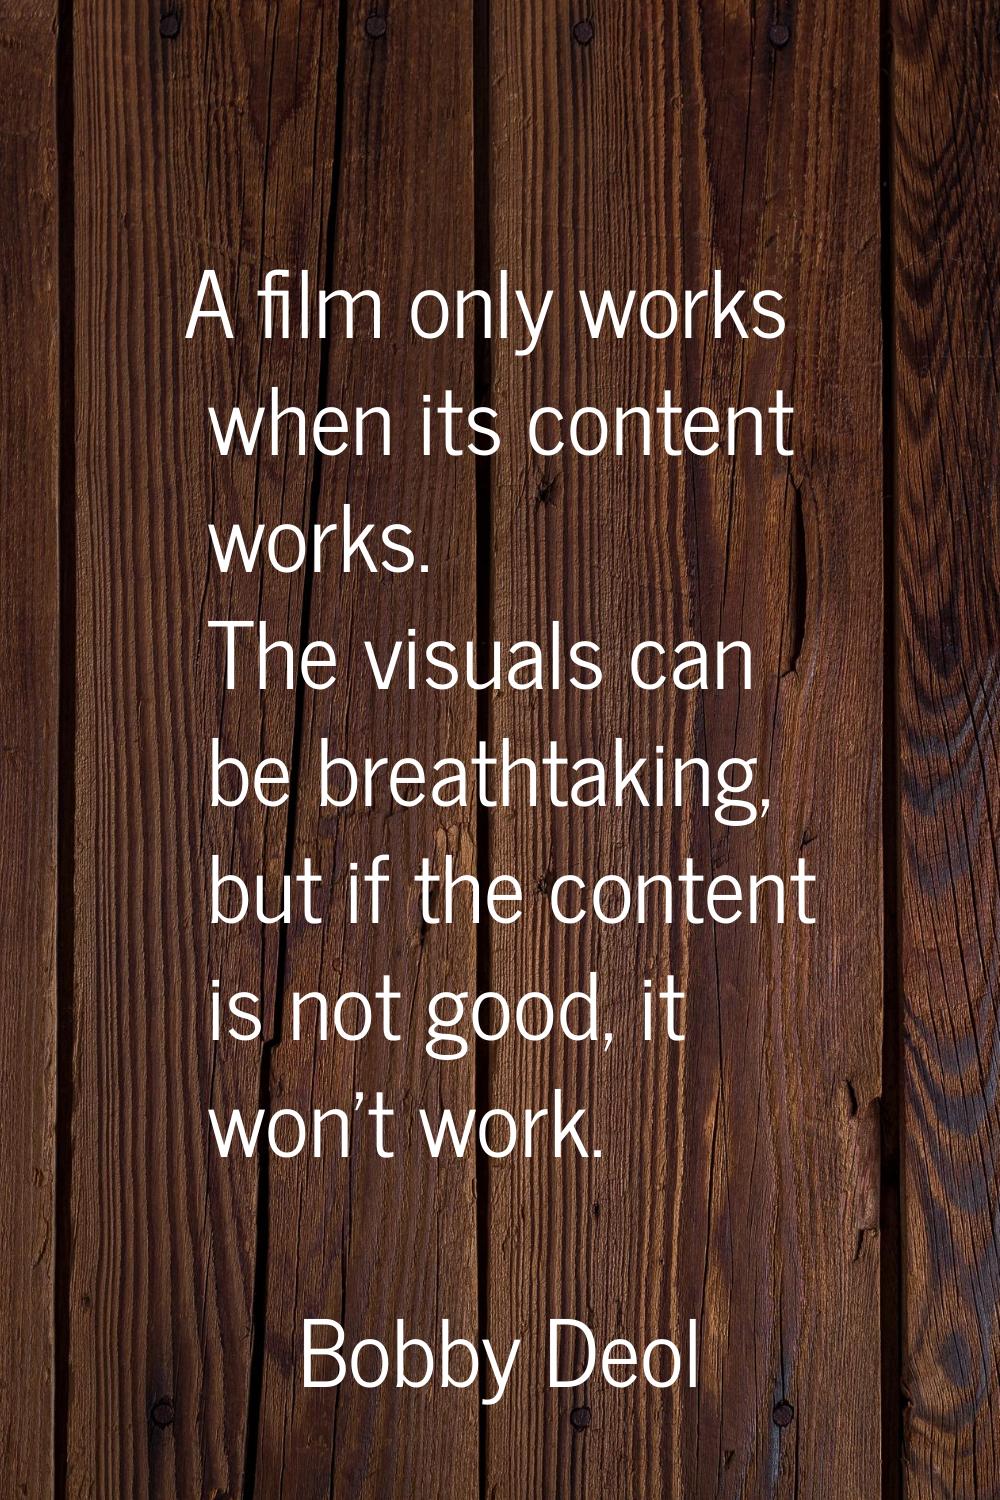 A film only works when its content works. The visuals can be breathtaking, but if the content is no